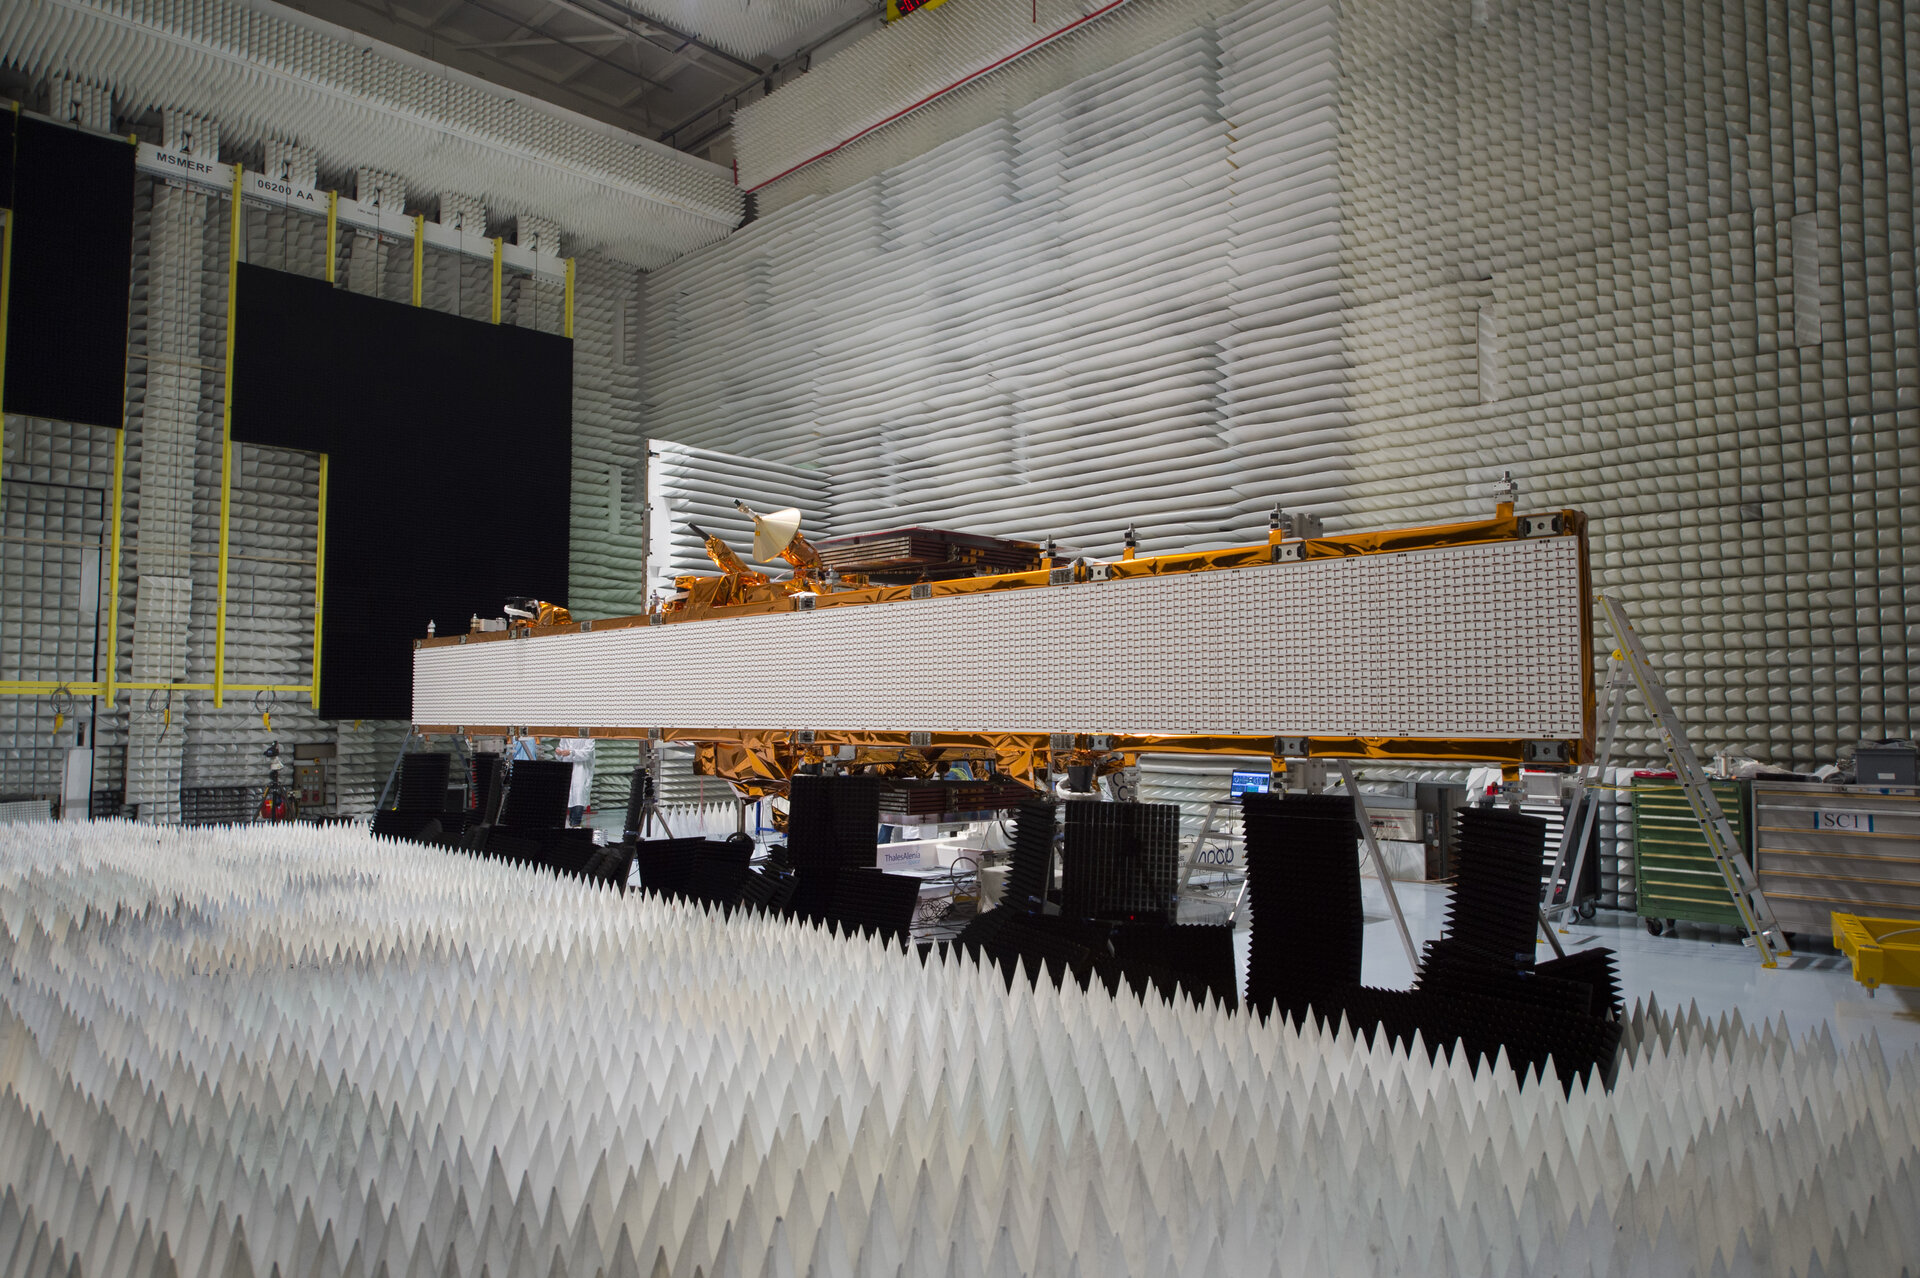 Sentinel-1A satellite during radio frequency tests